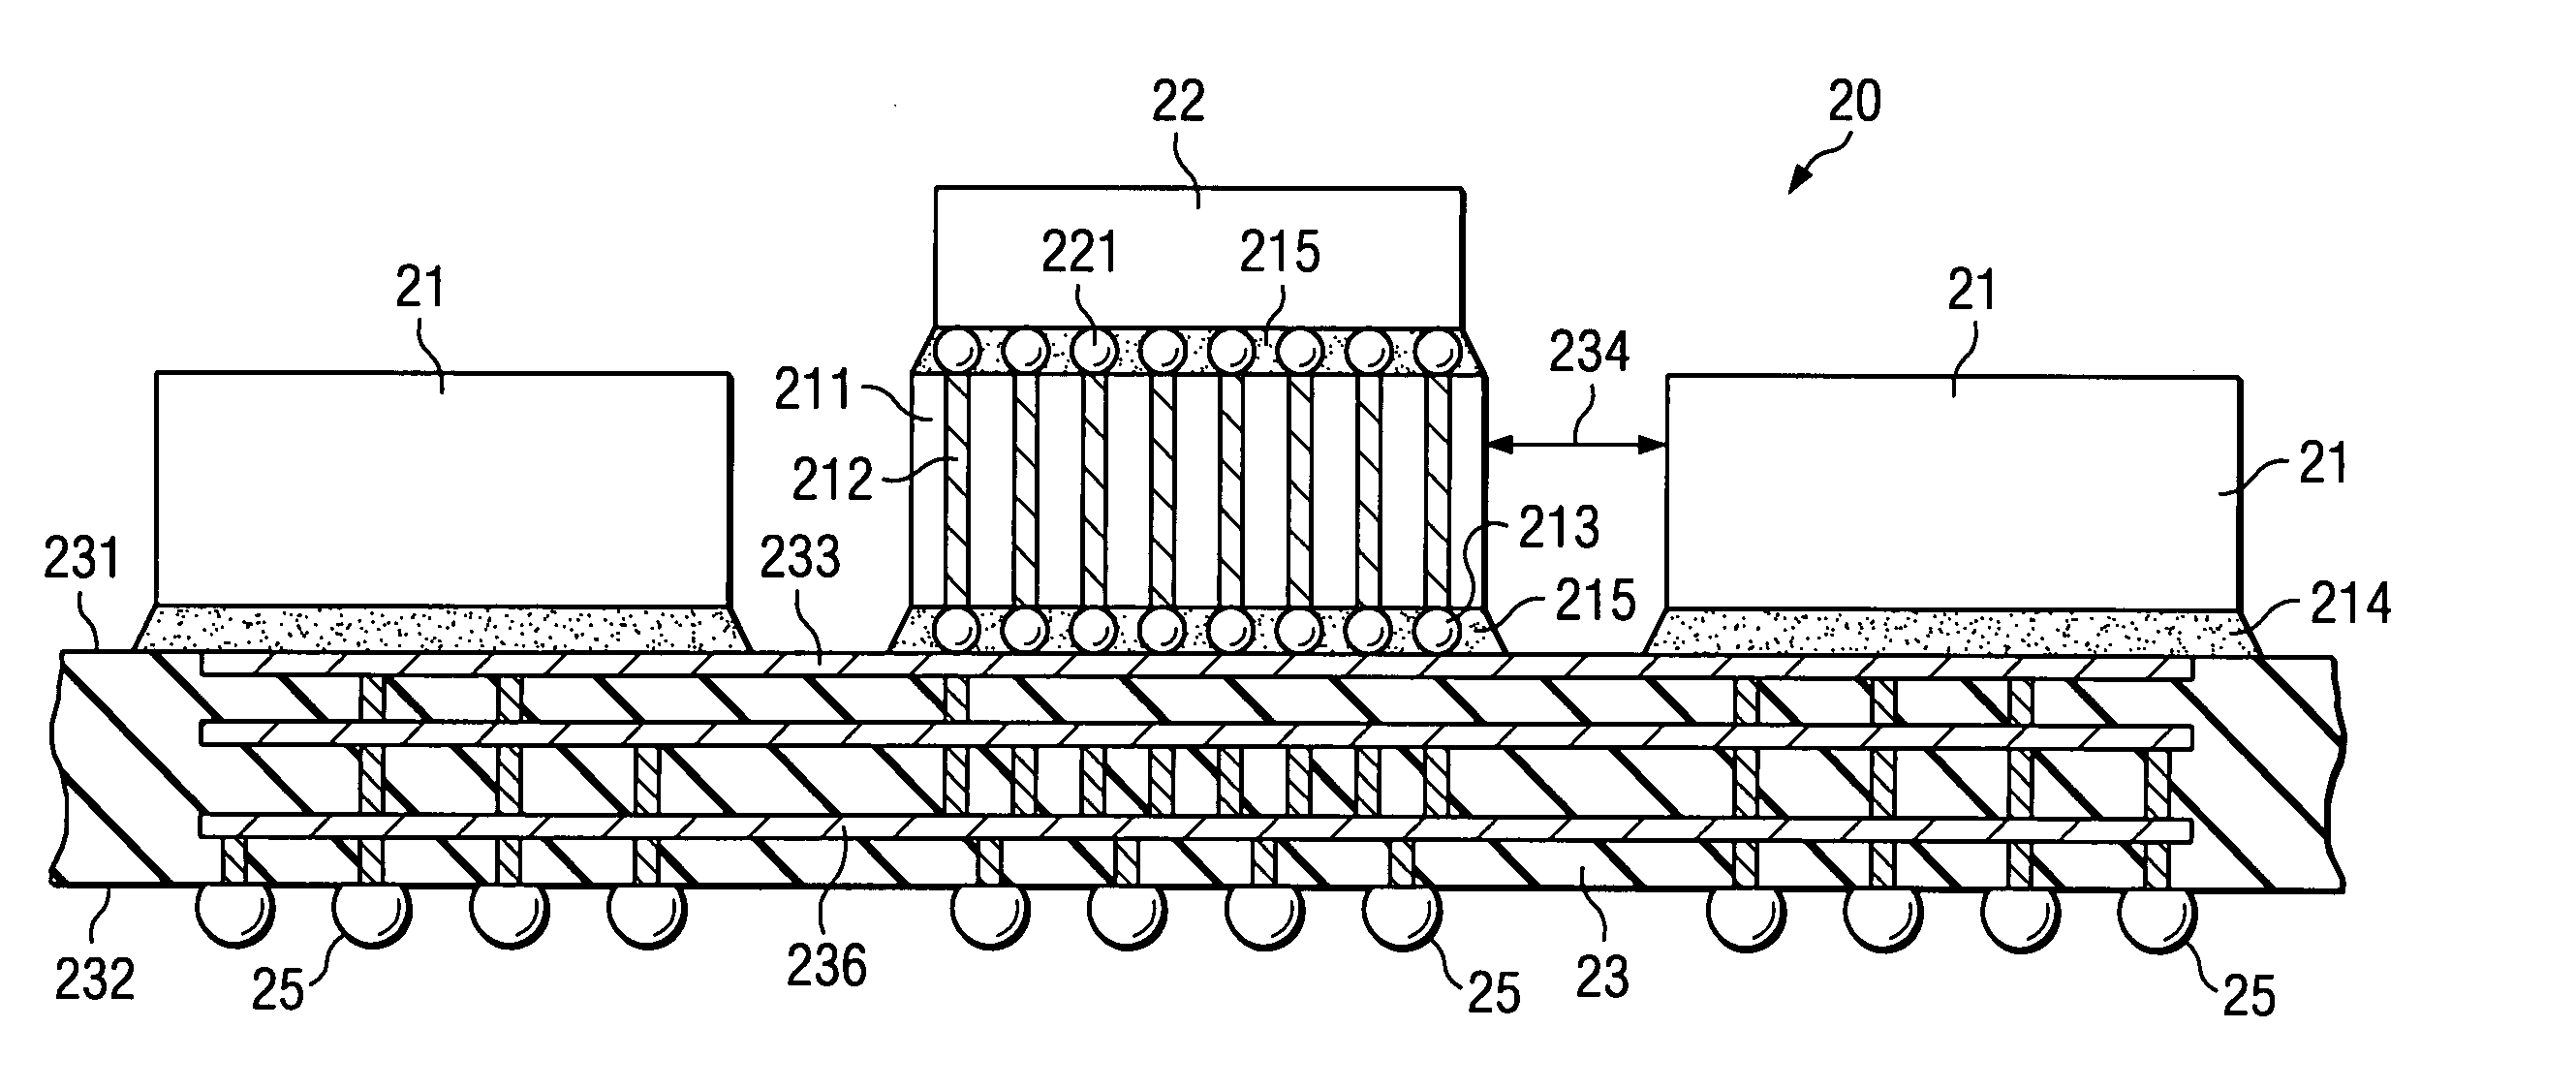 Flexible package with rigid substrate segments for high density integrated circuit systems